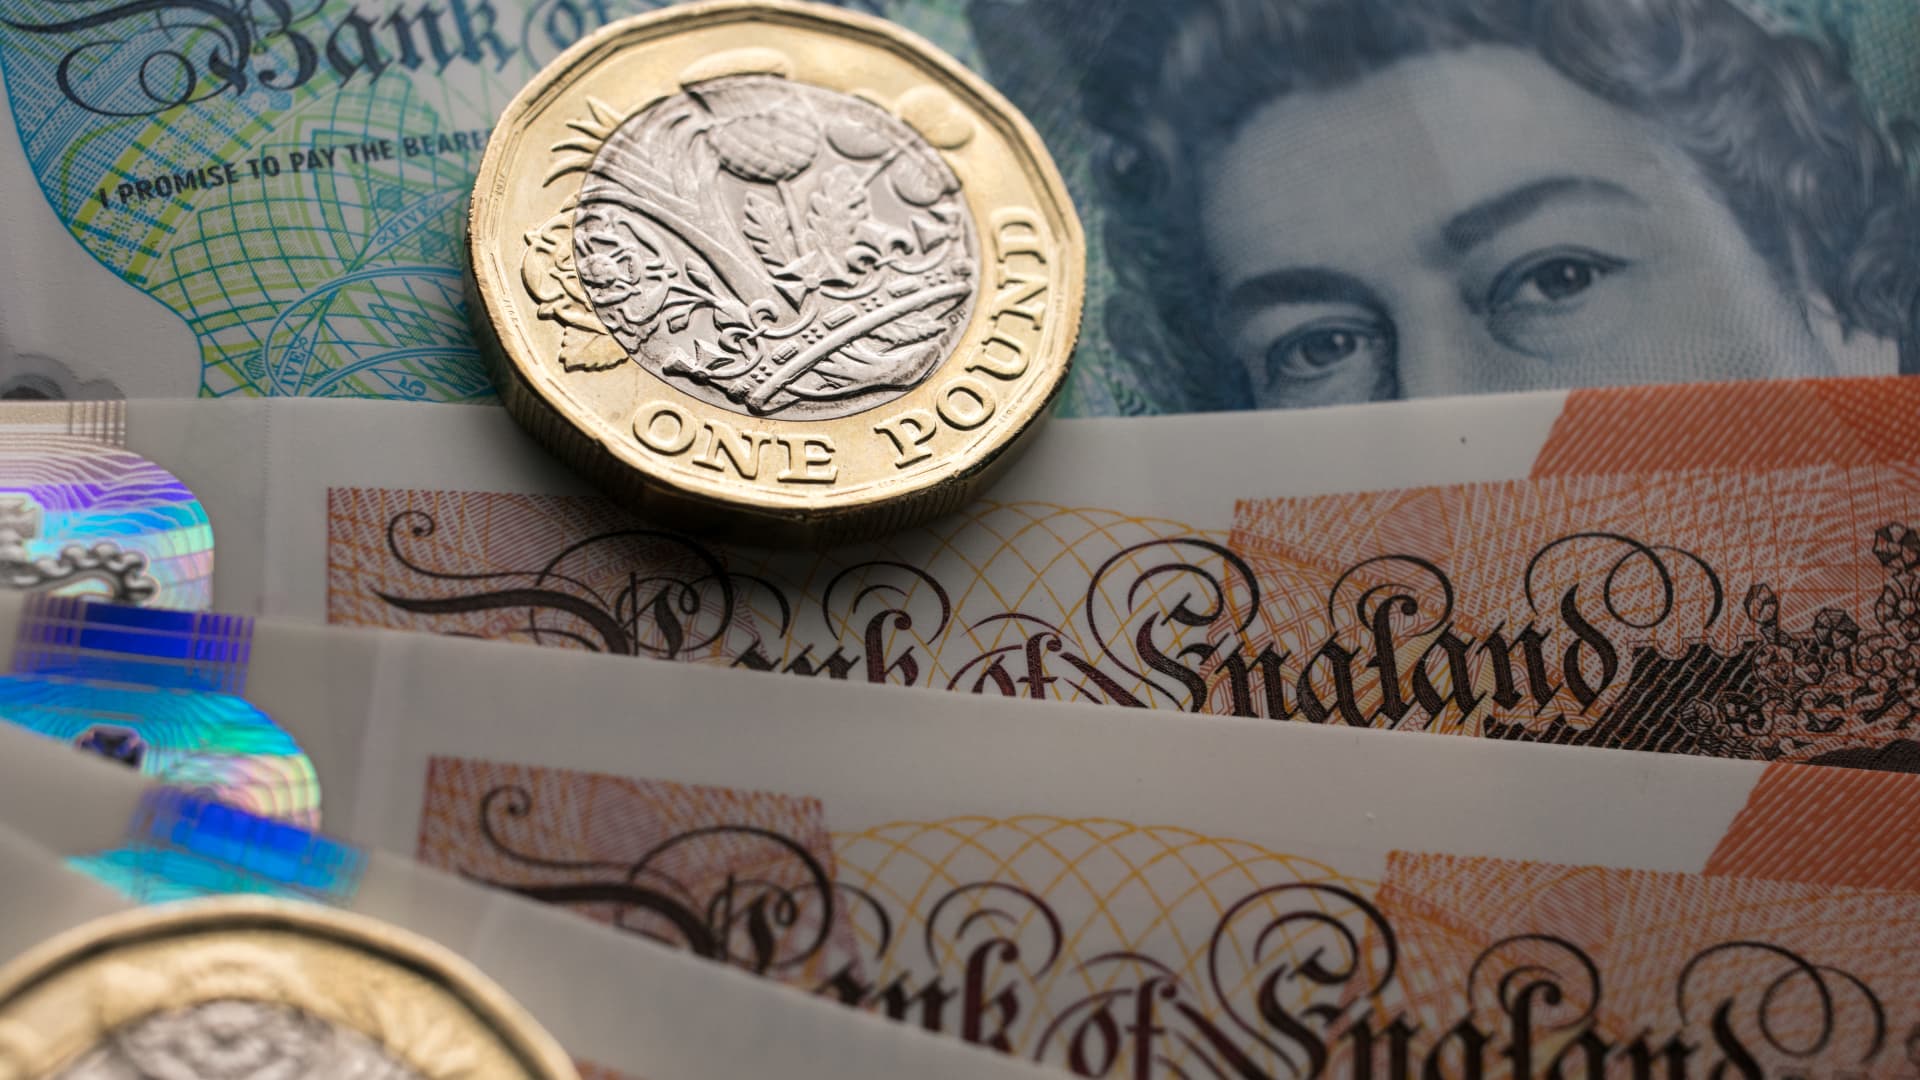 The British pound dips below .11 after new economic reforms